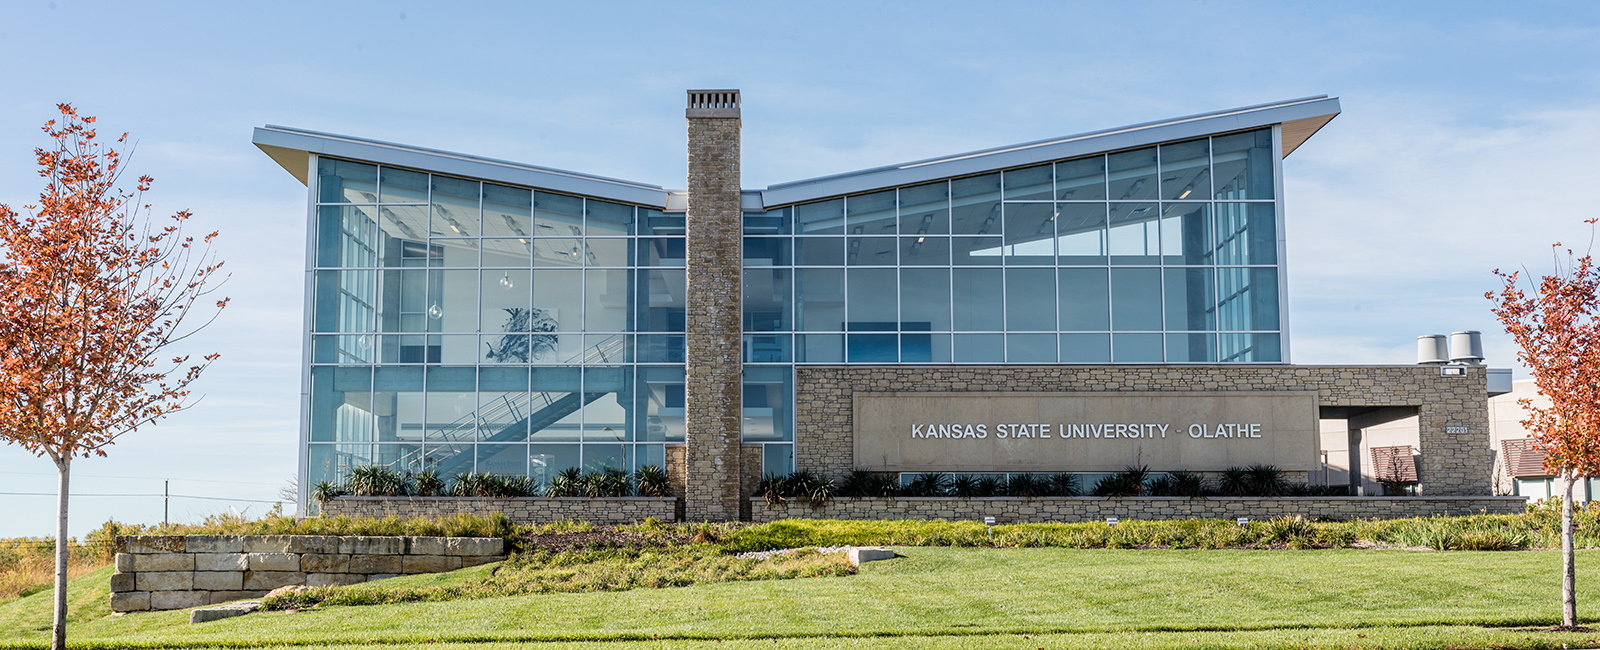 K-State Olathe campus on a spring day.